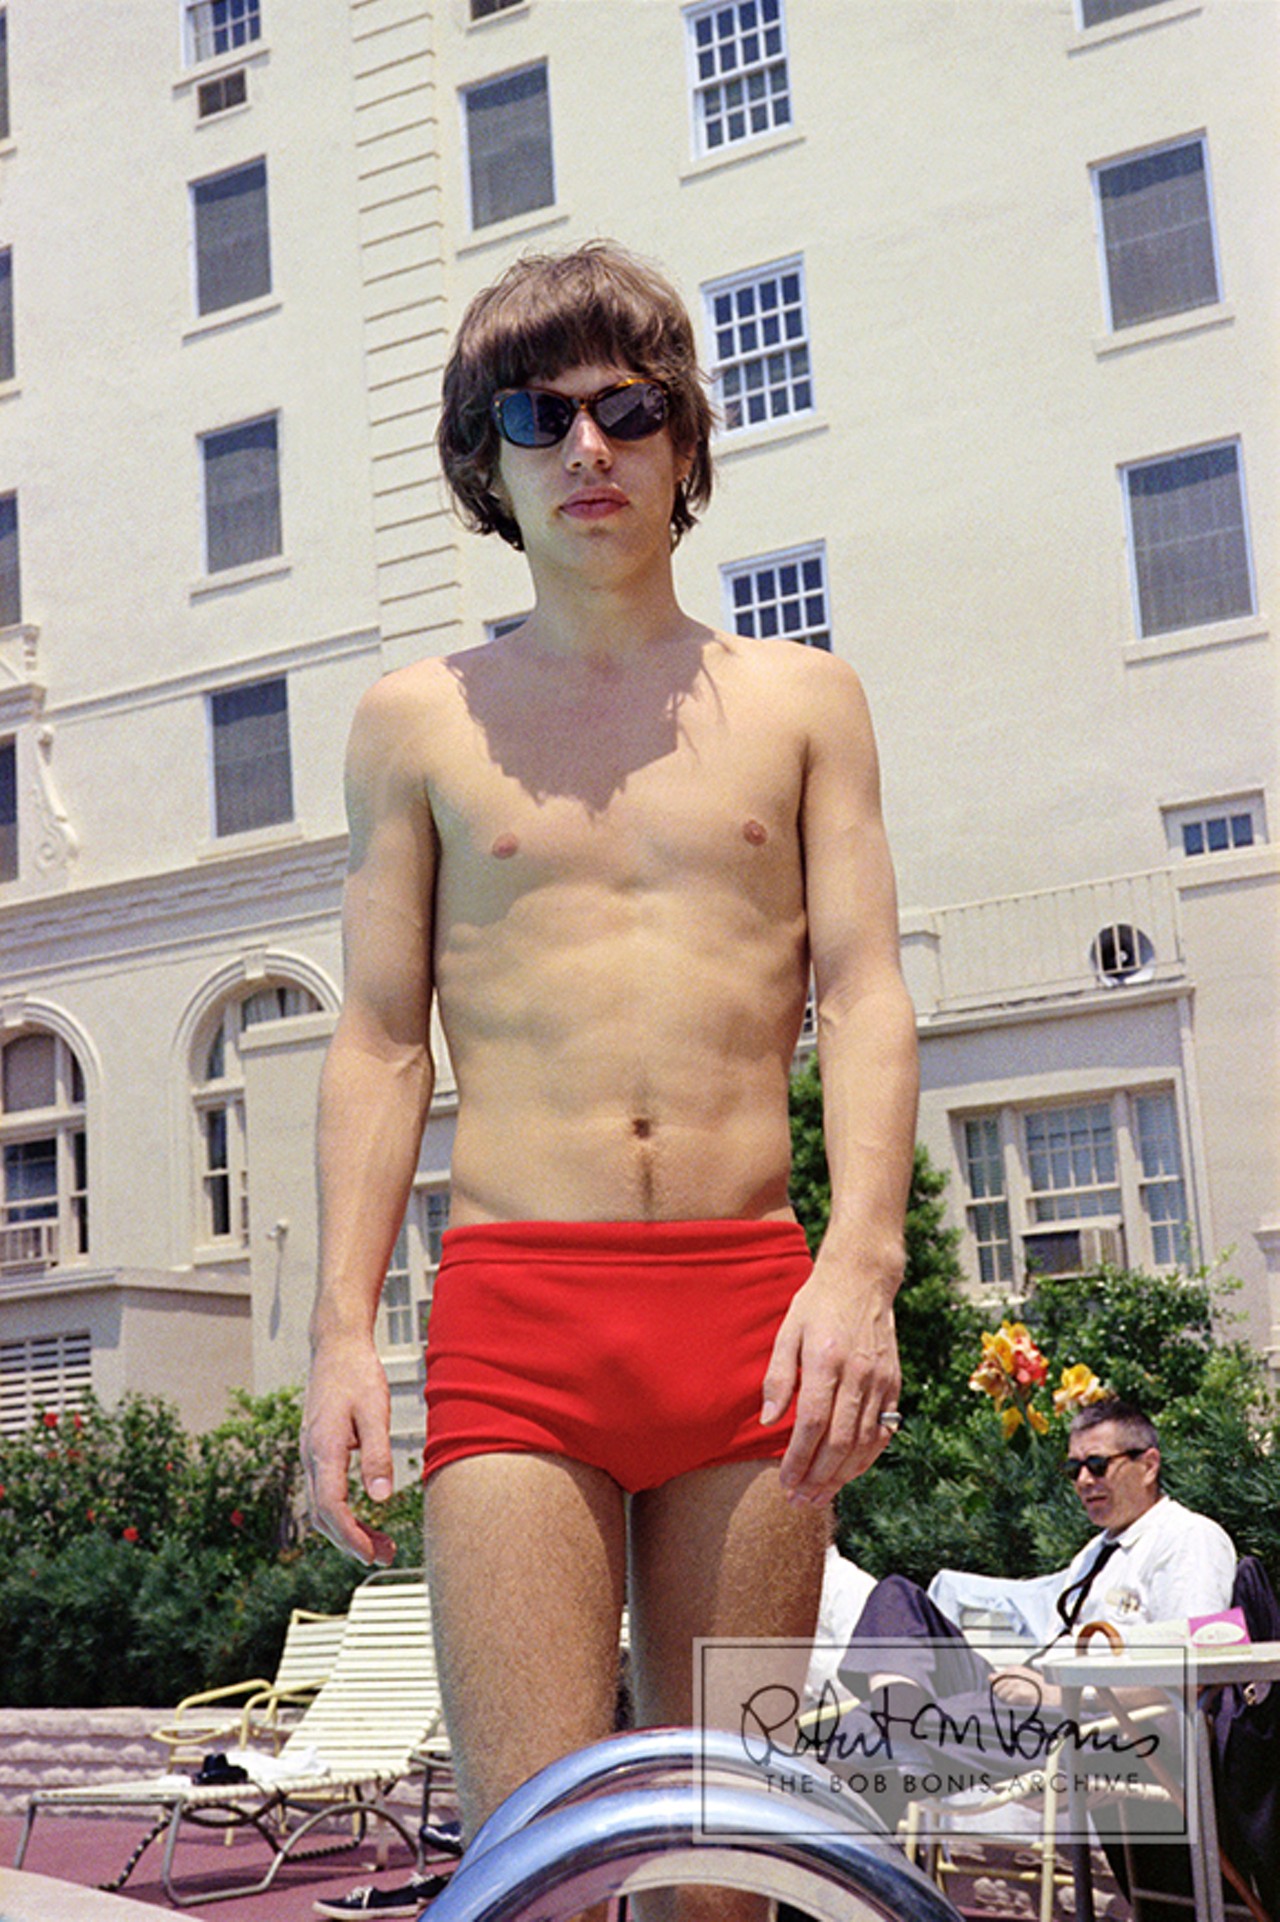 Mick Jagger, Clearwater, Florida, May 7, 1965 #1According to Keith Richards, this is the day that Mick Jagger wrote the lyrics for "Satisfaction," their breakthrough hit.